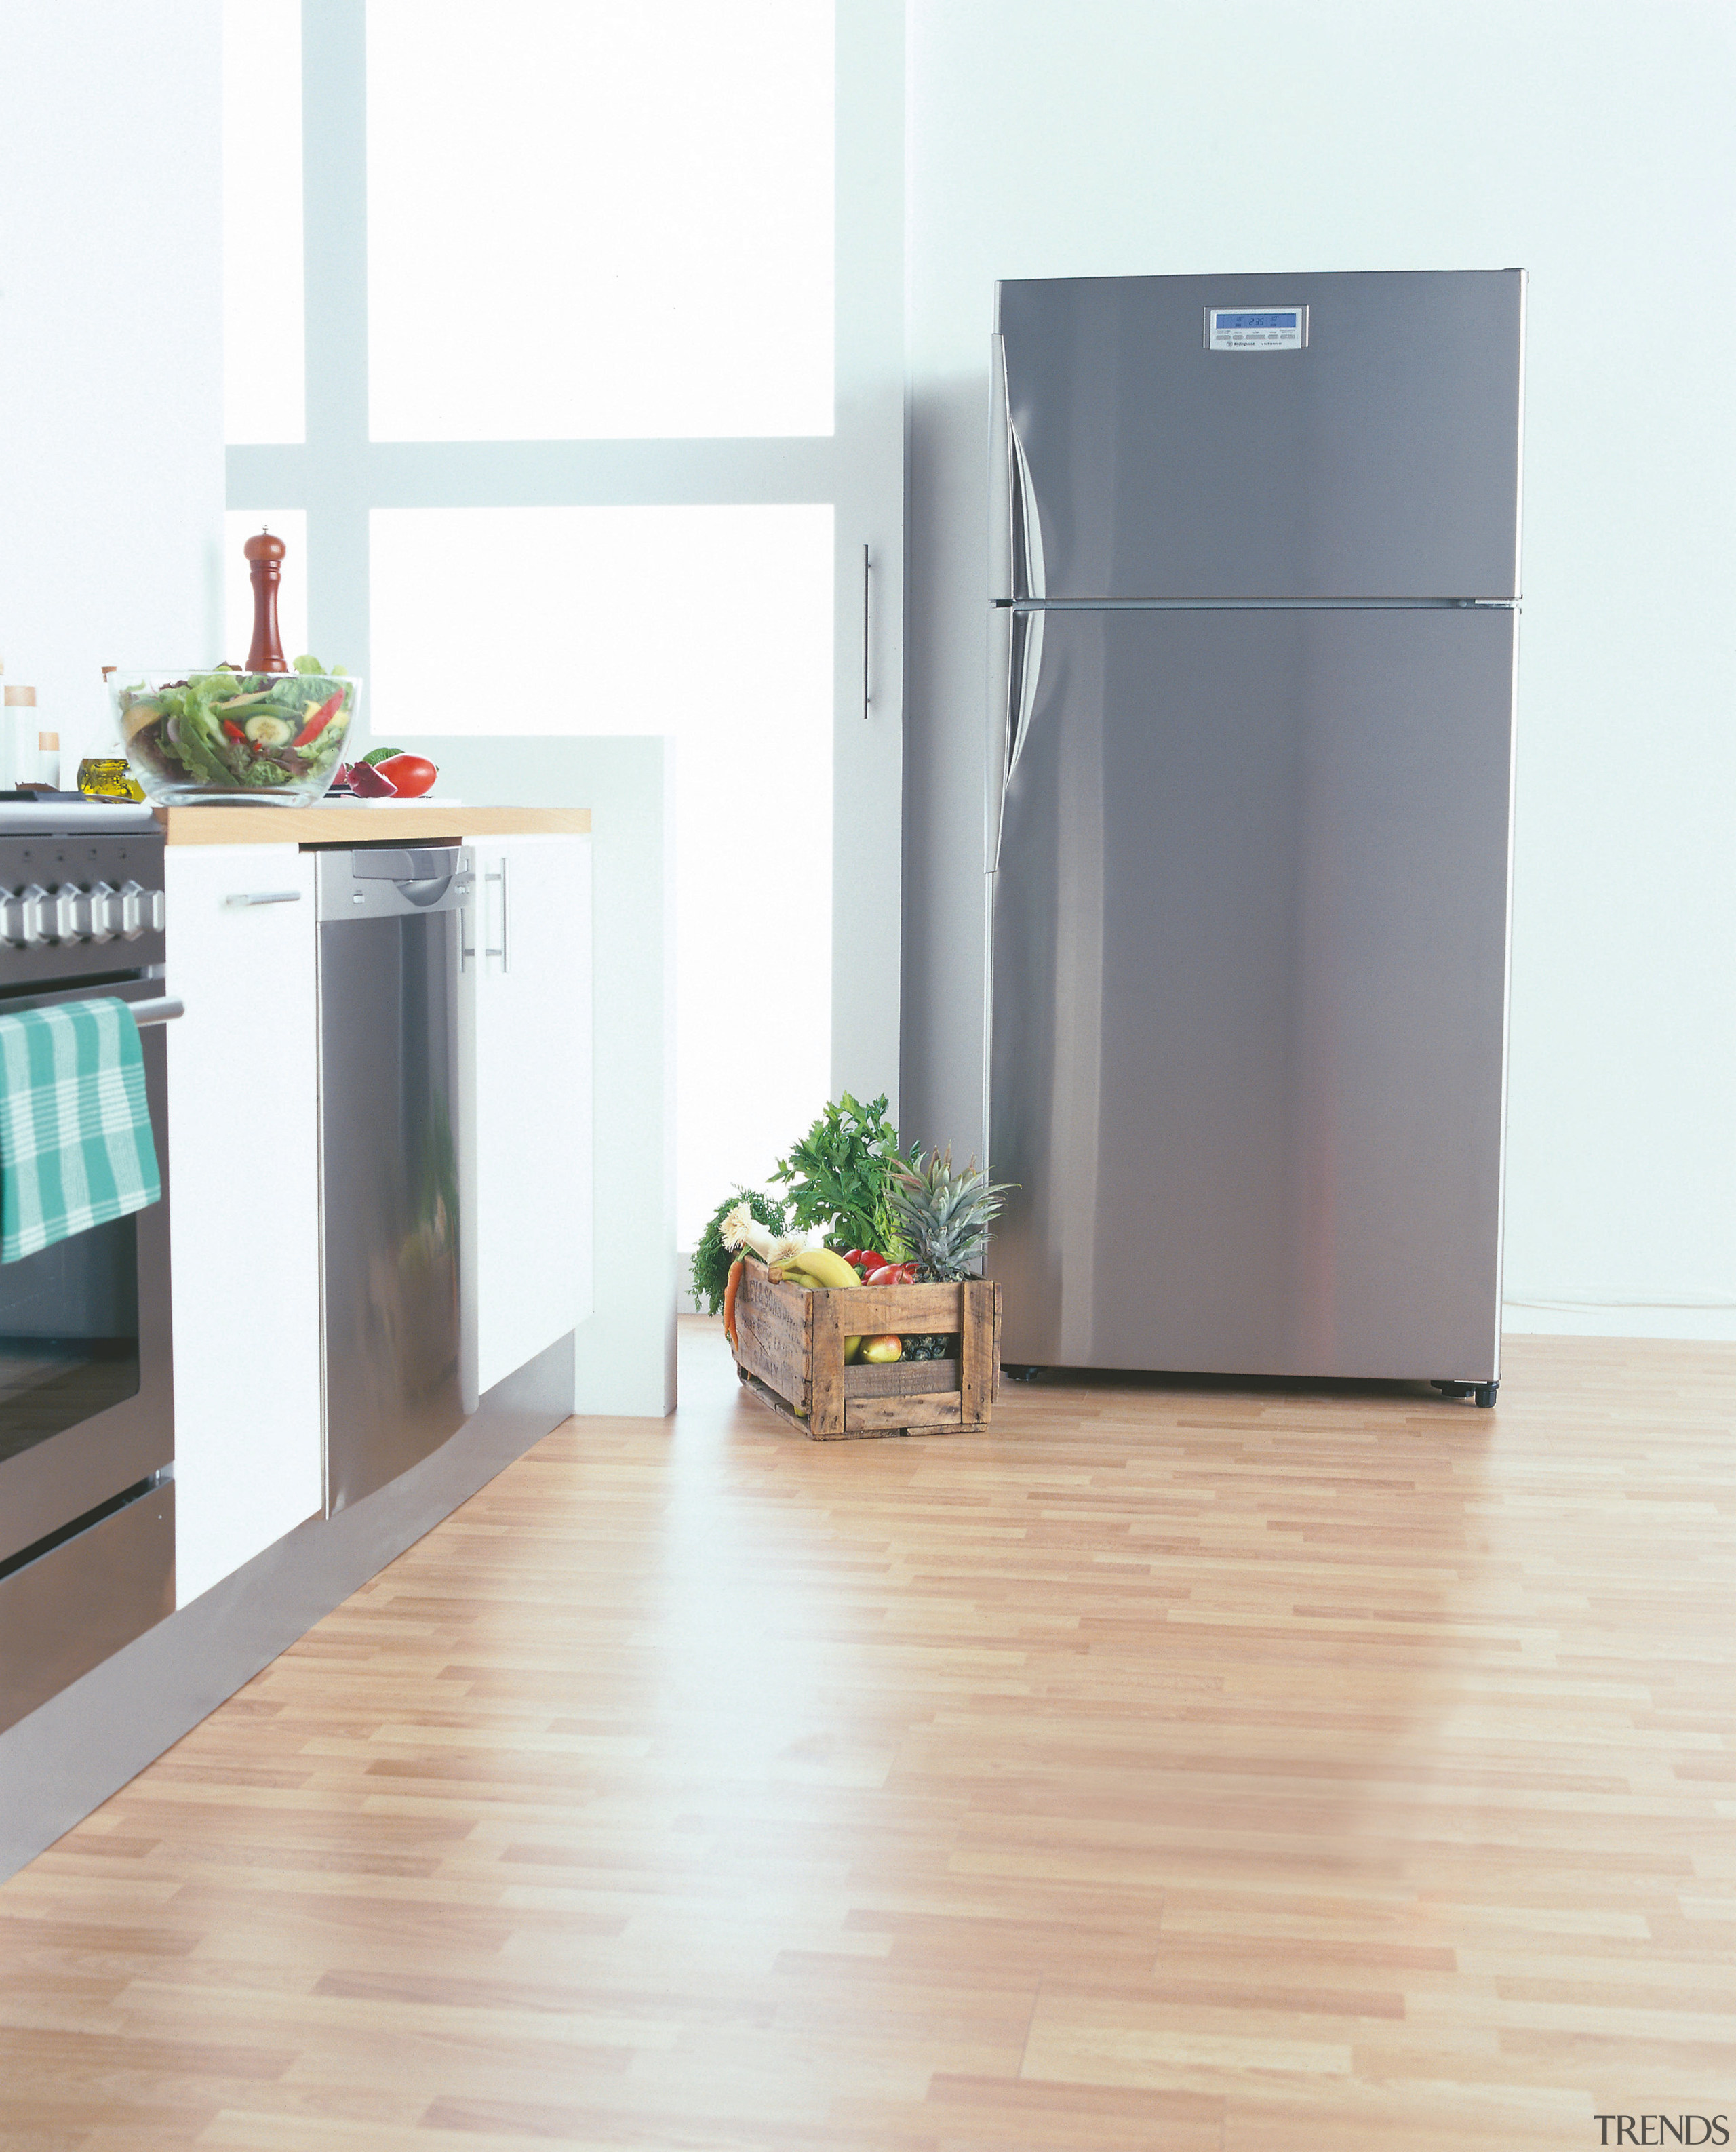 A kitchen featuring a large Westinghouse refrigerator. The floor, flooring, hardwood, home appliance, kitchen appliance, major appliance, product, refrigerator, white